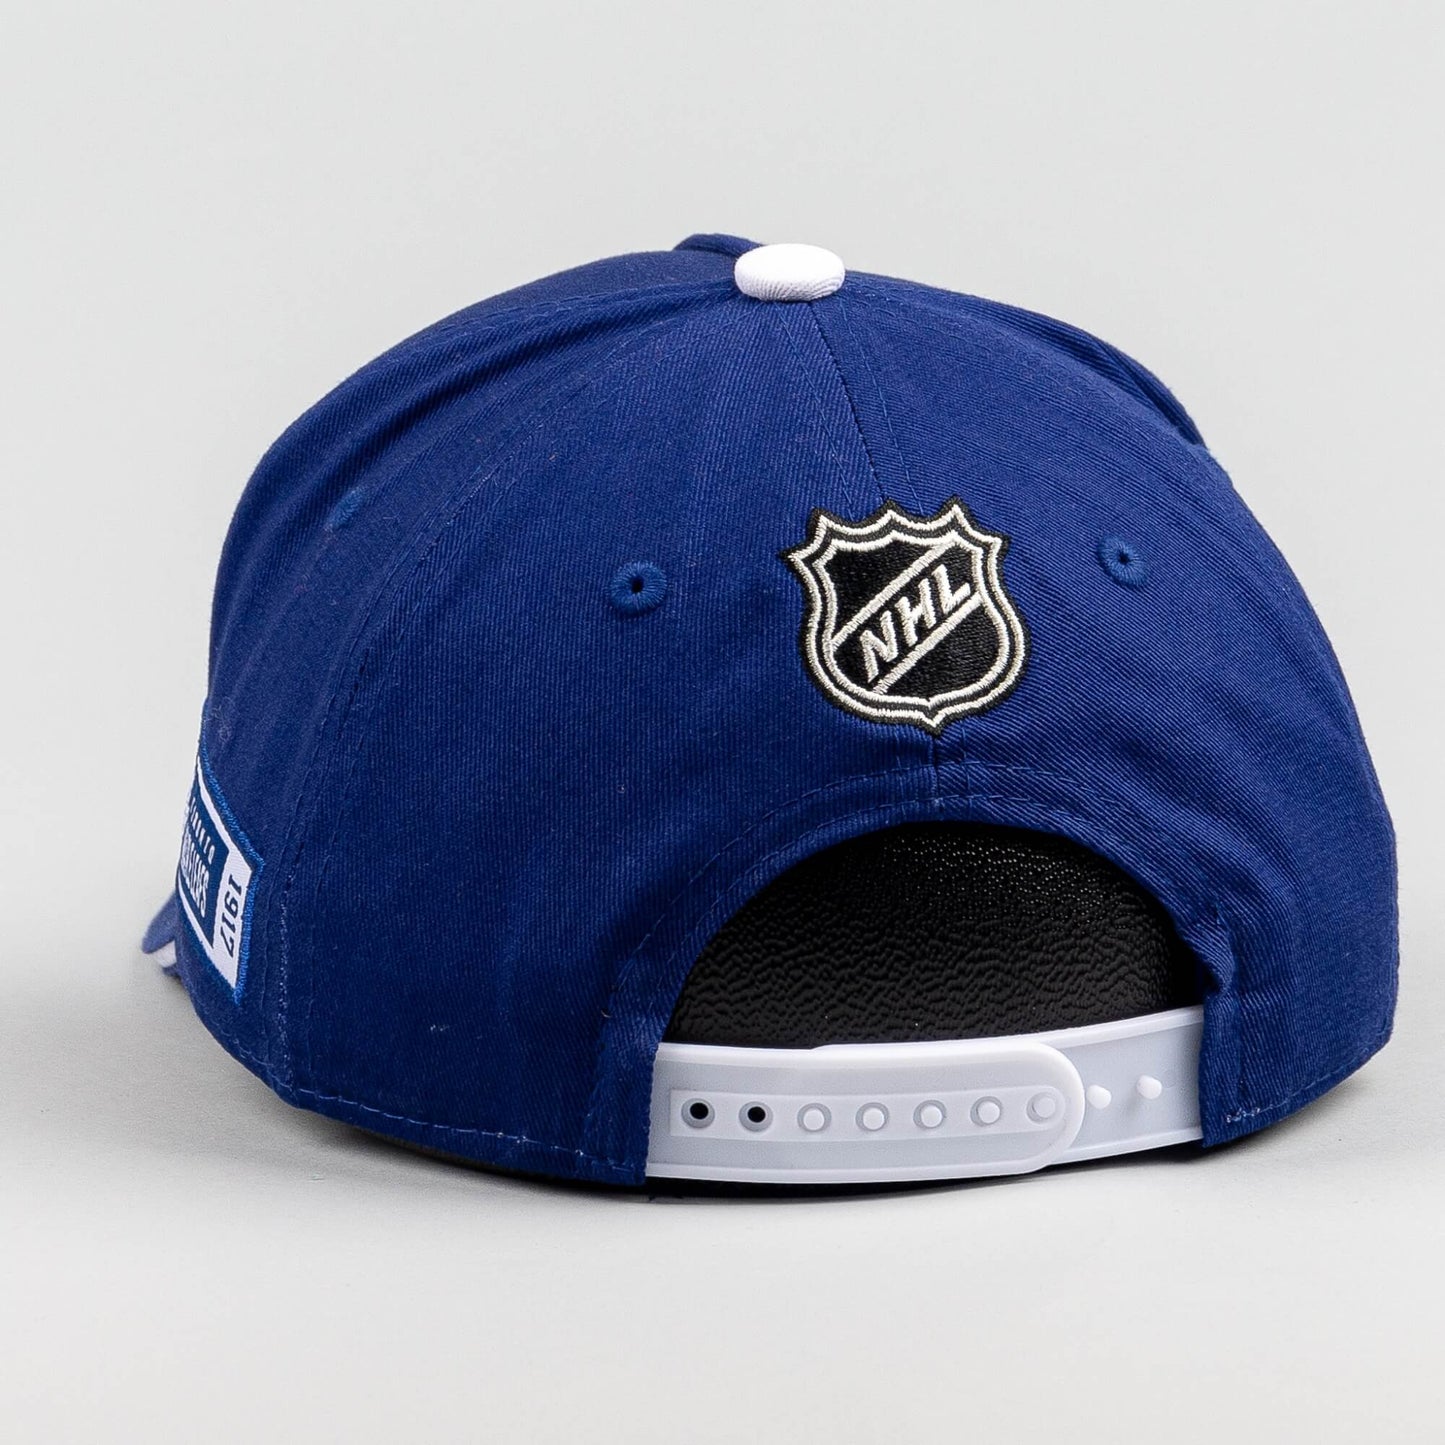 Outer Stuff NHL Big-Face Precurved Snap Mapleleafs Leafs Blue